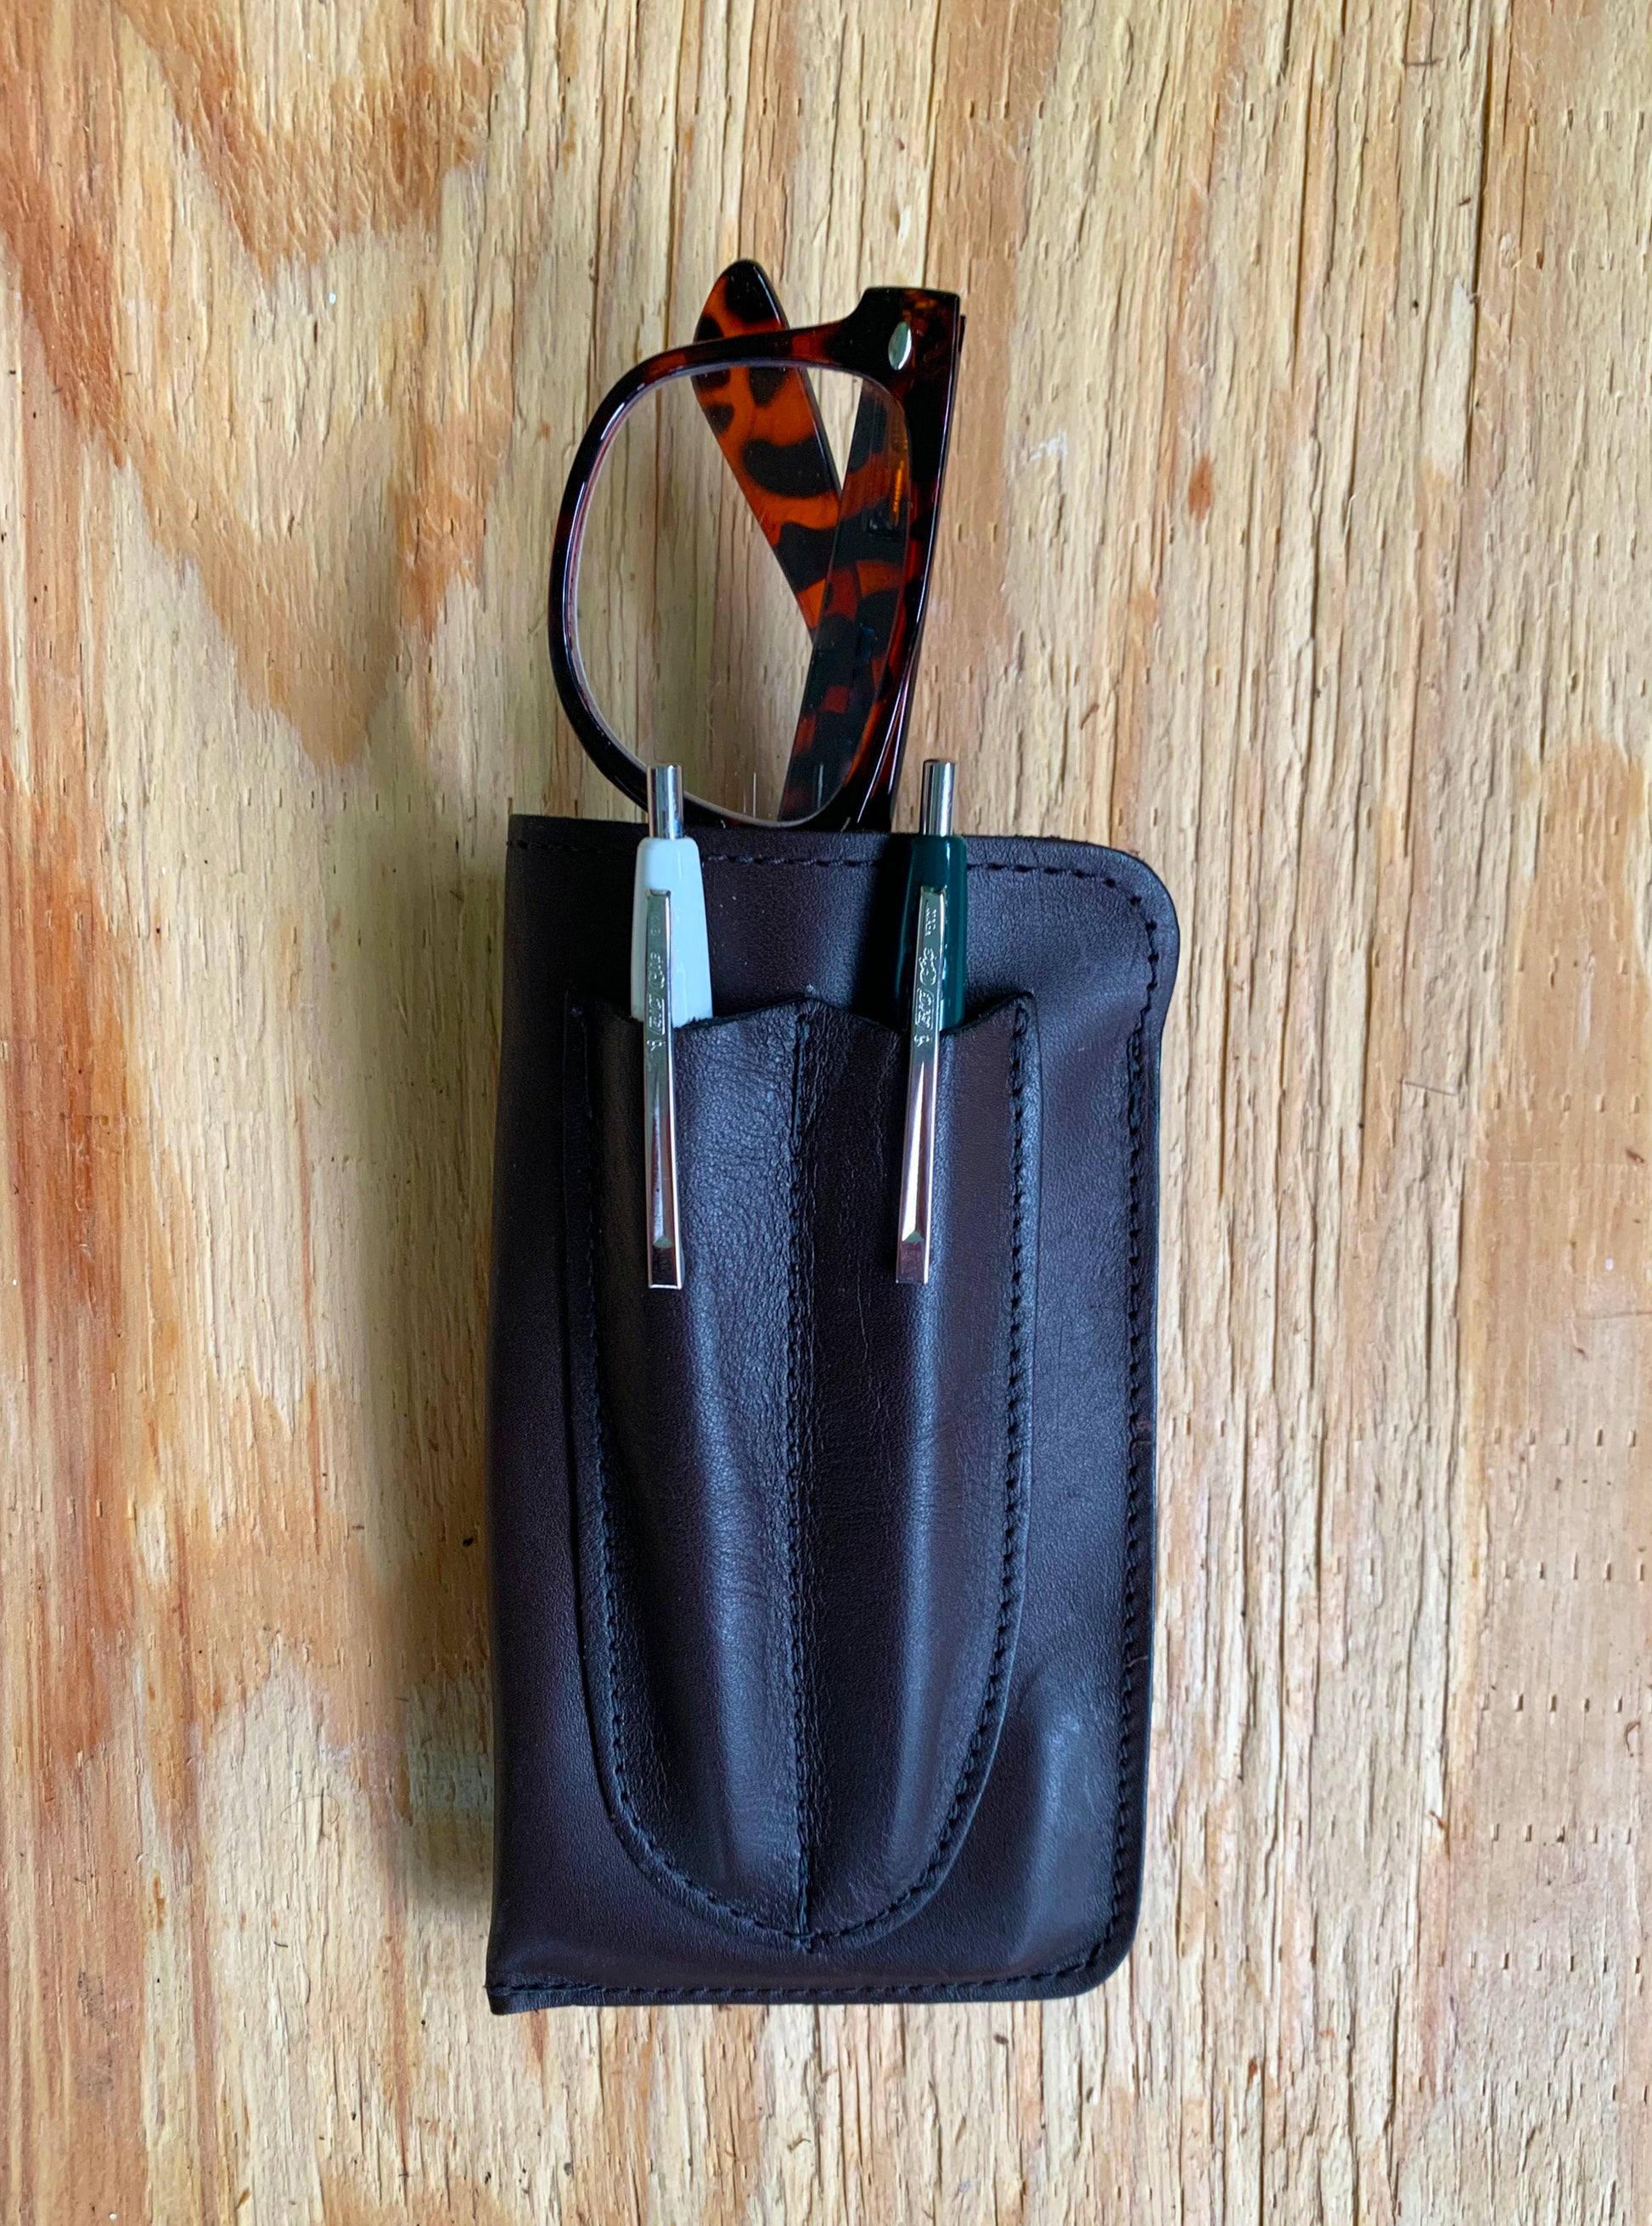 Pen Sleeve with Flap - 2 Pens - Black - Vegetable Tanned Leather